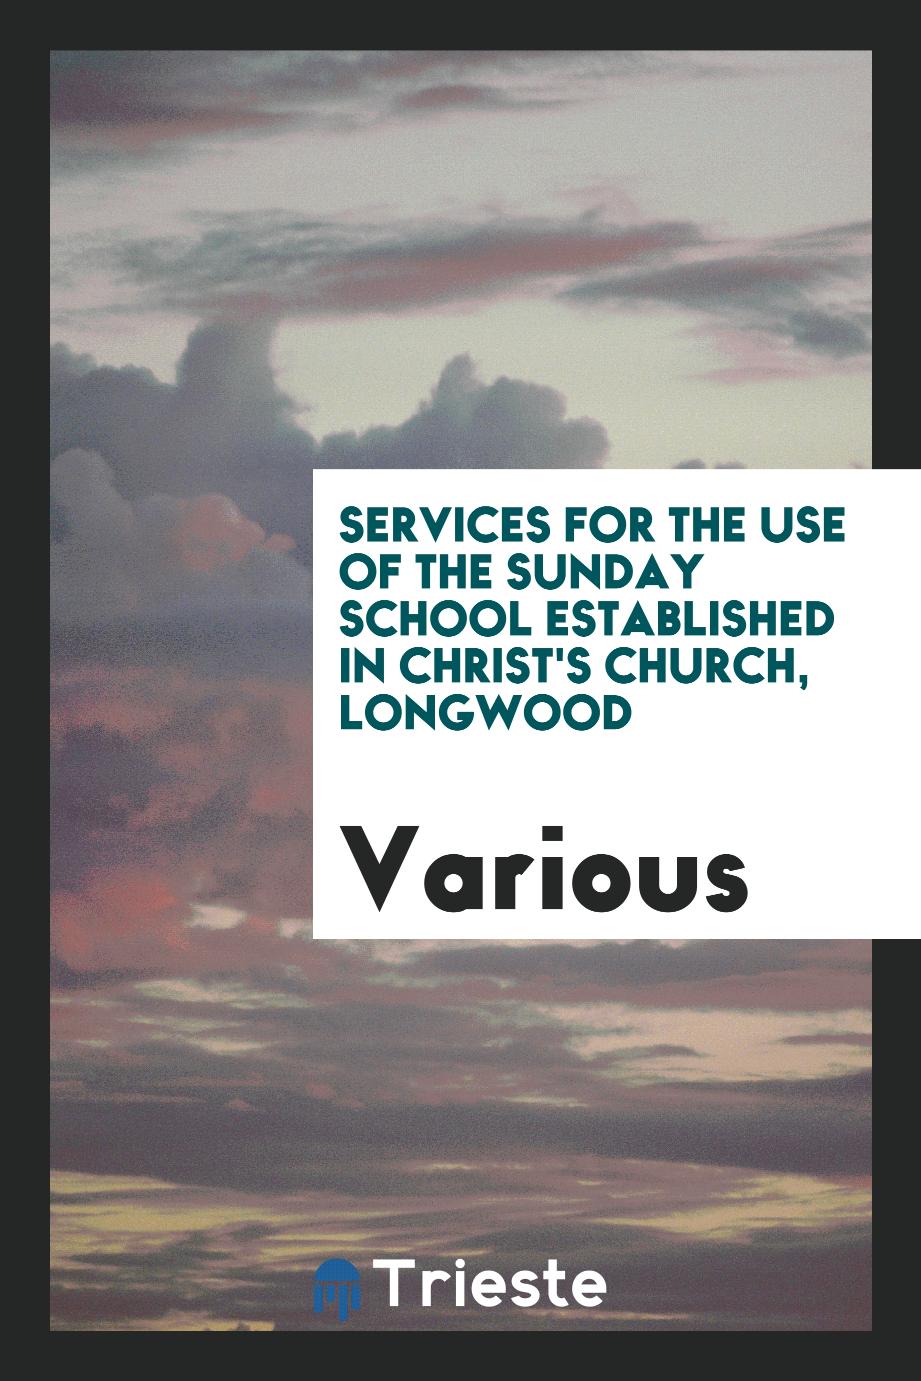 Services for the Use of the Sunday School Established in Christ's Church, Longwood